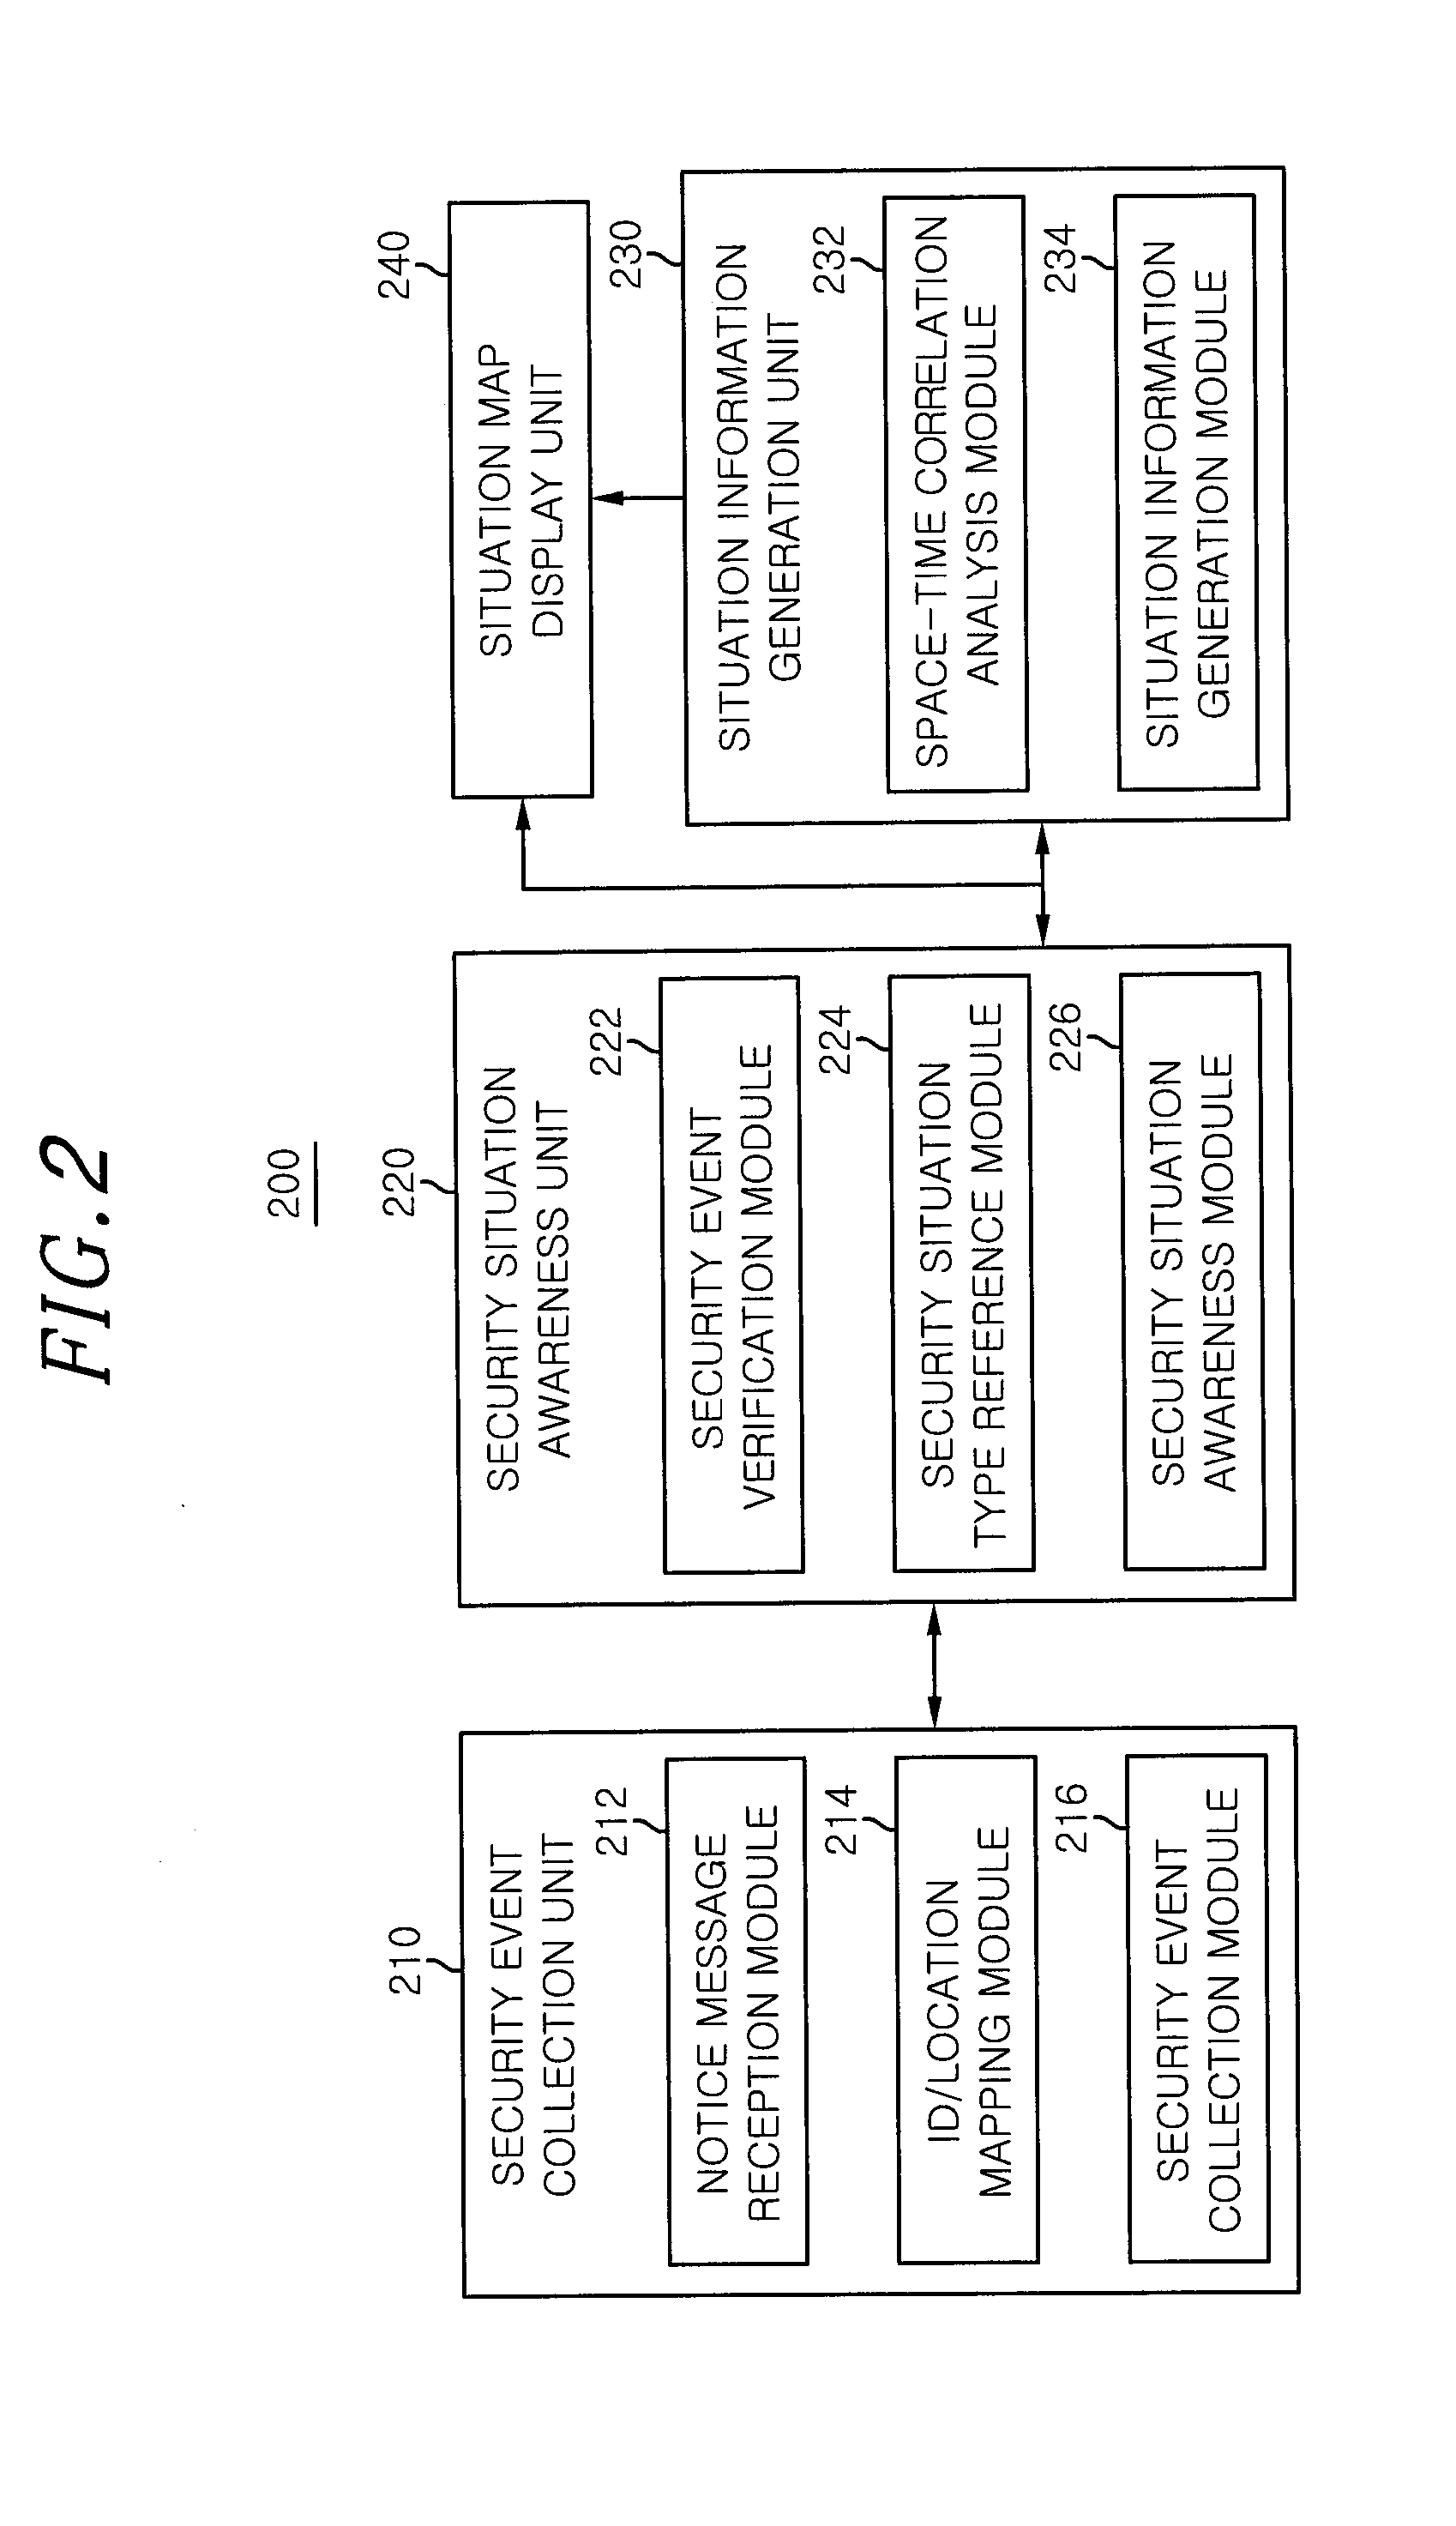 Apparatus and method for recognizing security situation and generating situation information based on spatial linkage of physical and it security